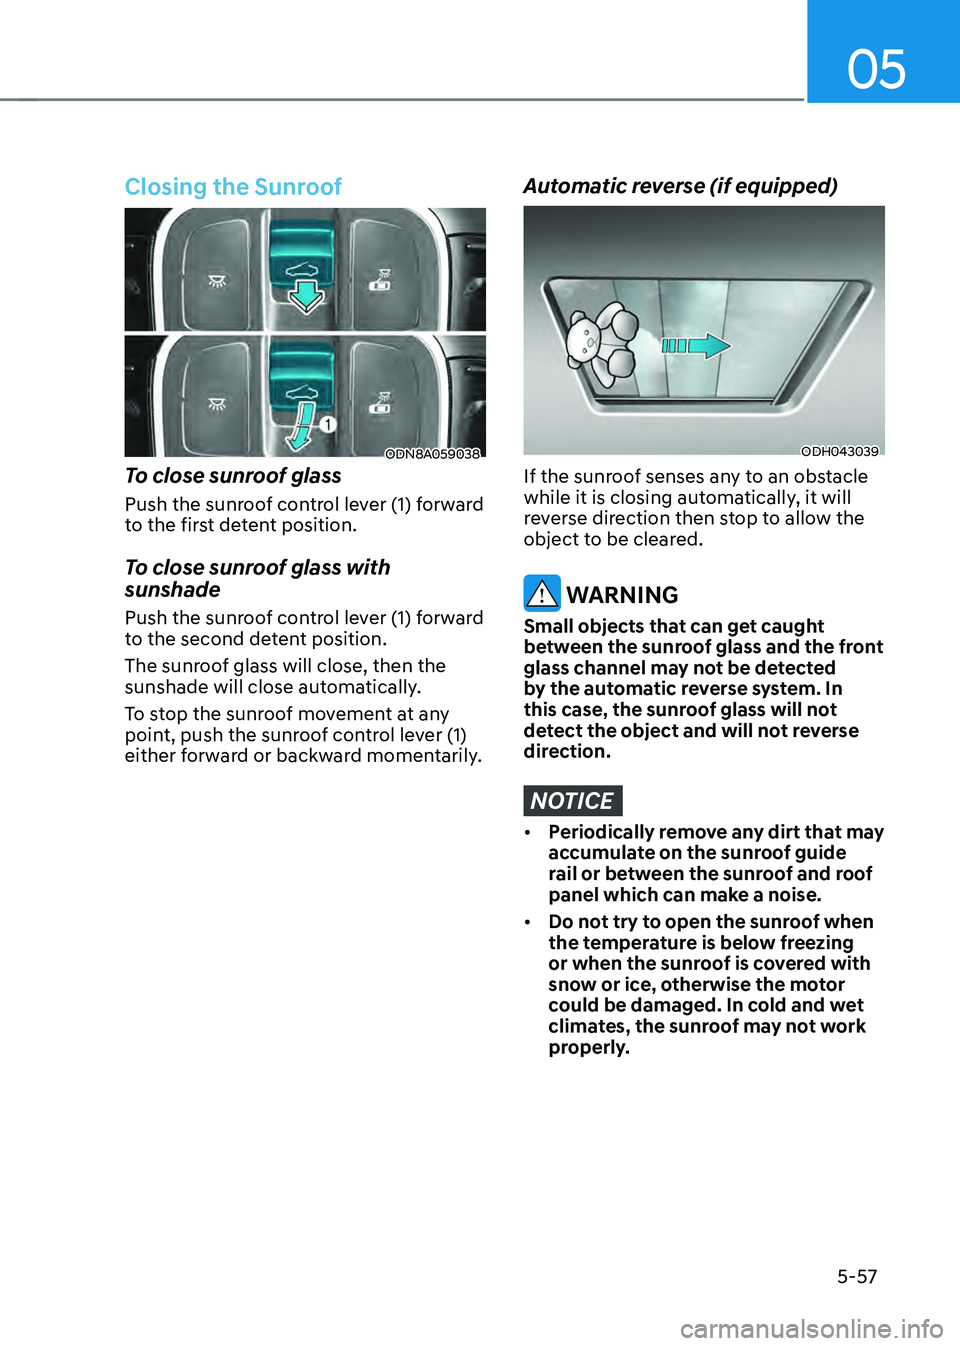 HYUNDAI SONATA HYBRID 2022  Owners Manual 05
5-57
Closing the Sunroof
ODN8A059038
To close sunroof glass 
Push the sunroof control lever (1) forward 
to the first detent position.
To close sunroof glass with 
sunshade 
Push the sunroof contro